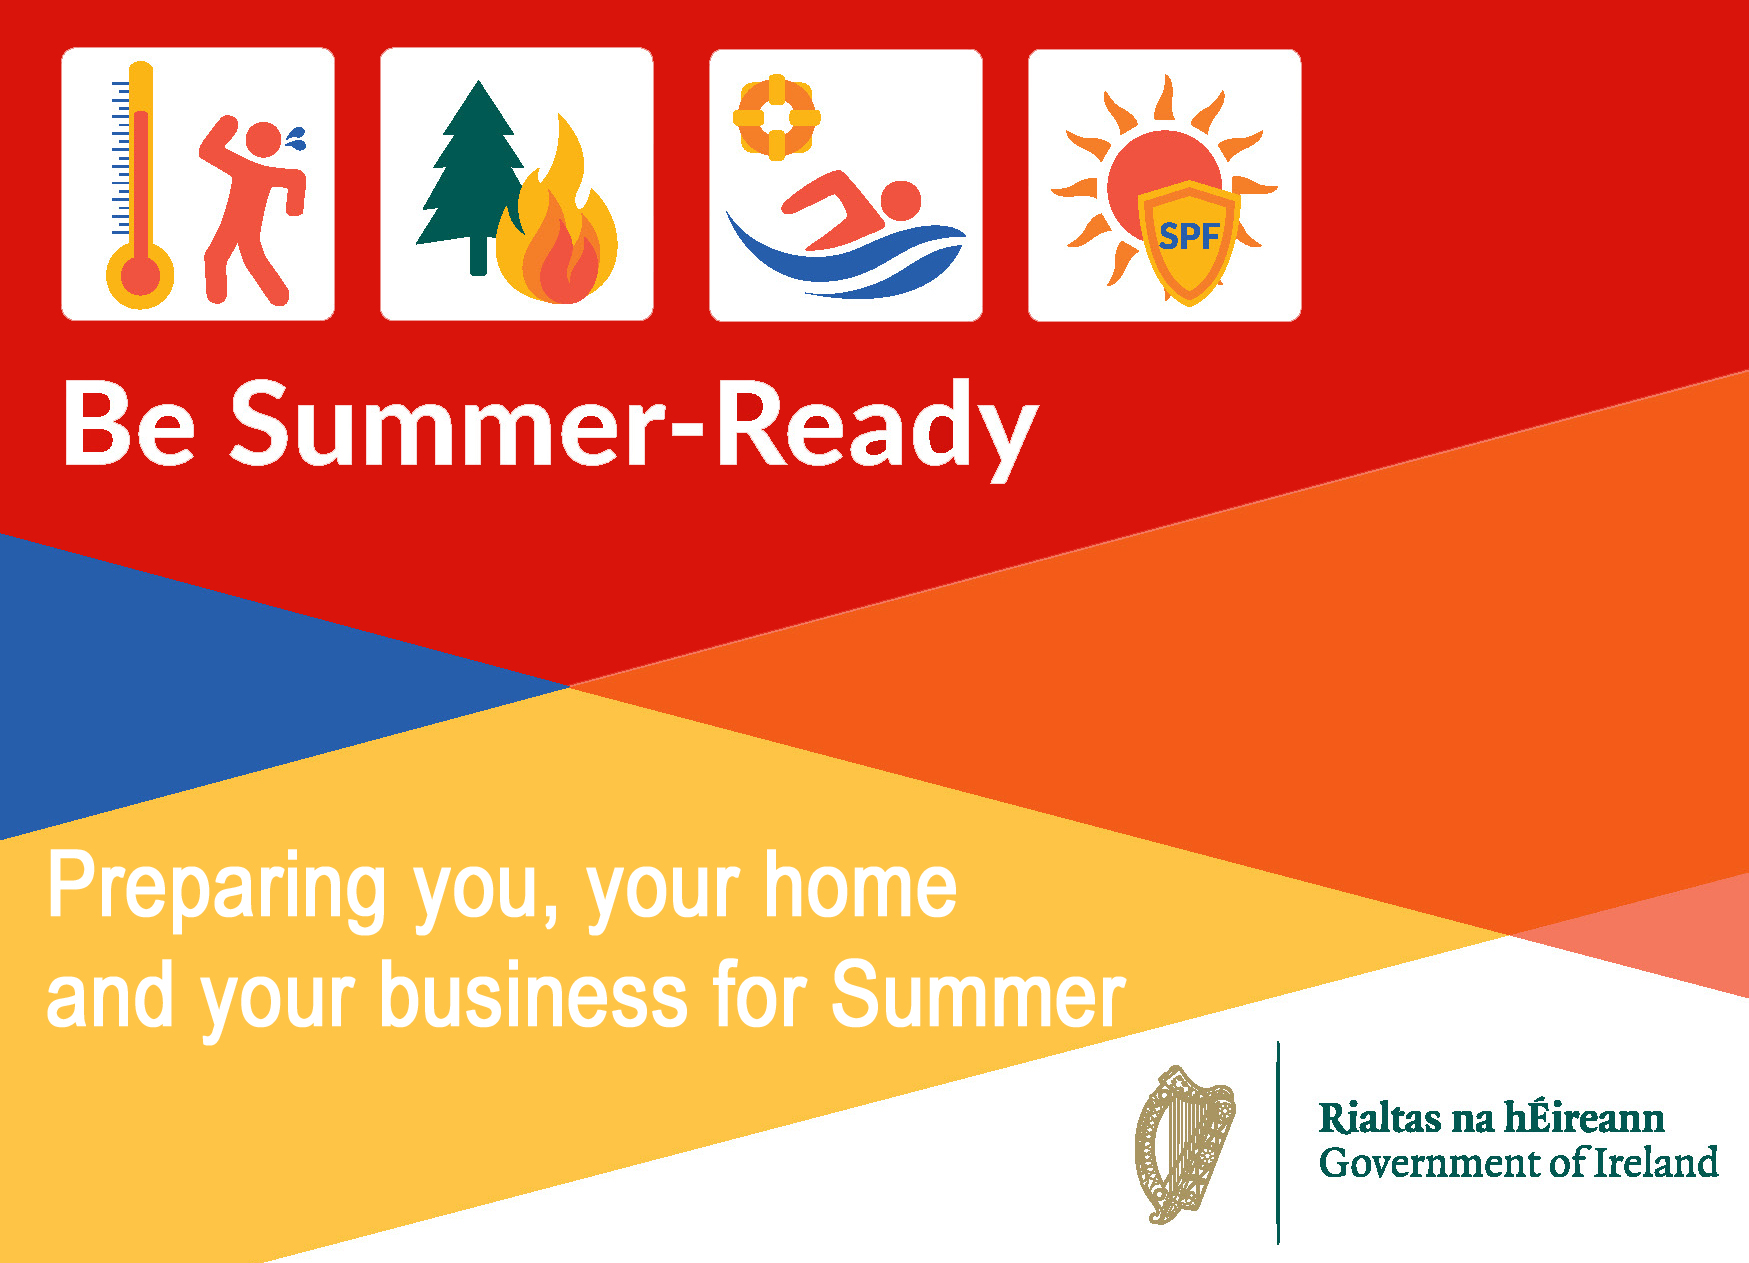 Be Summer Ready 2021 Campaign